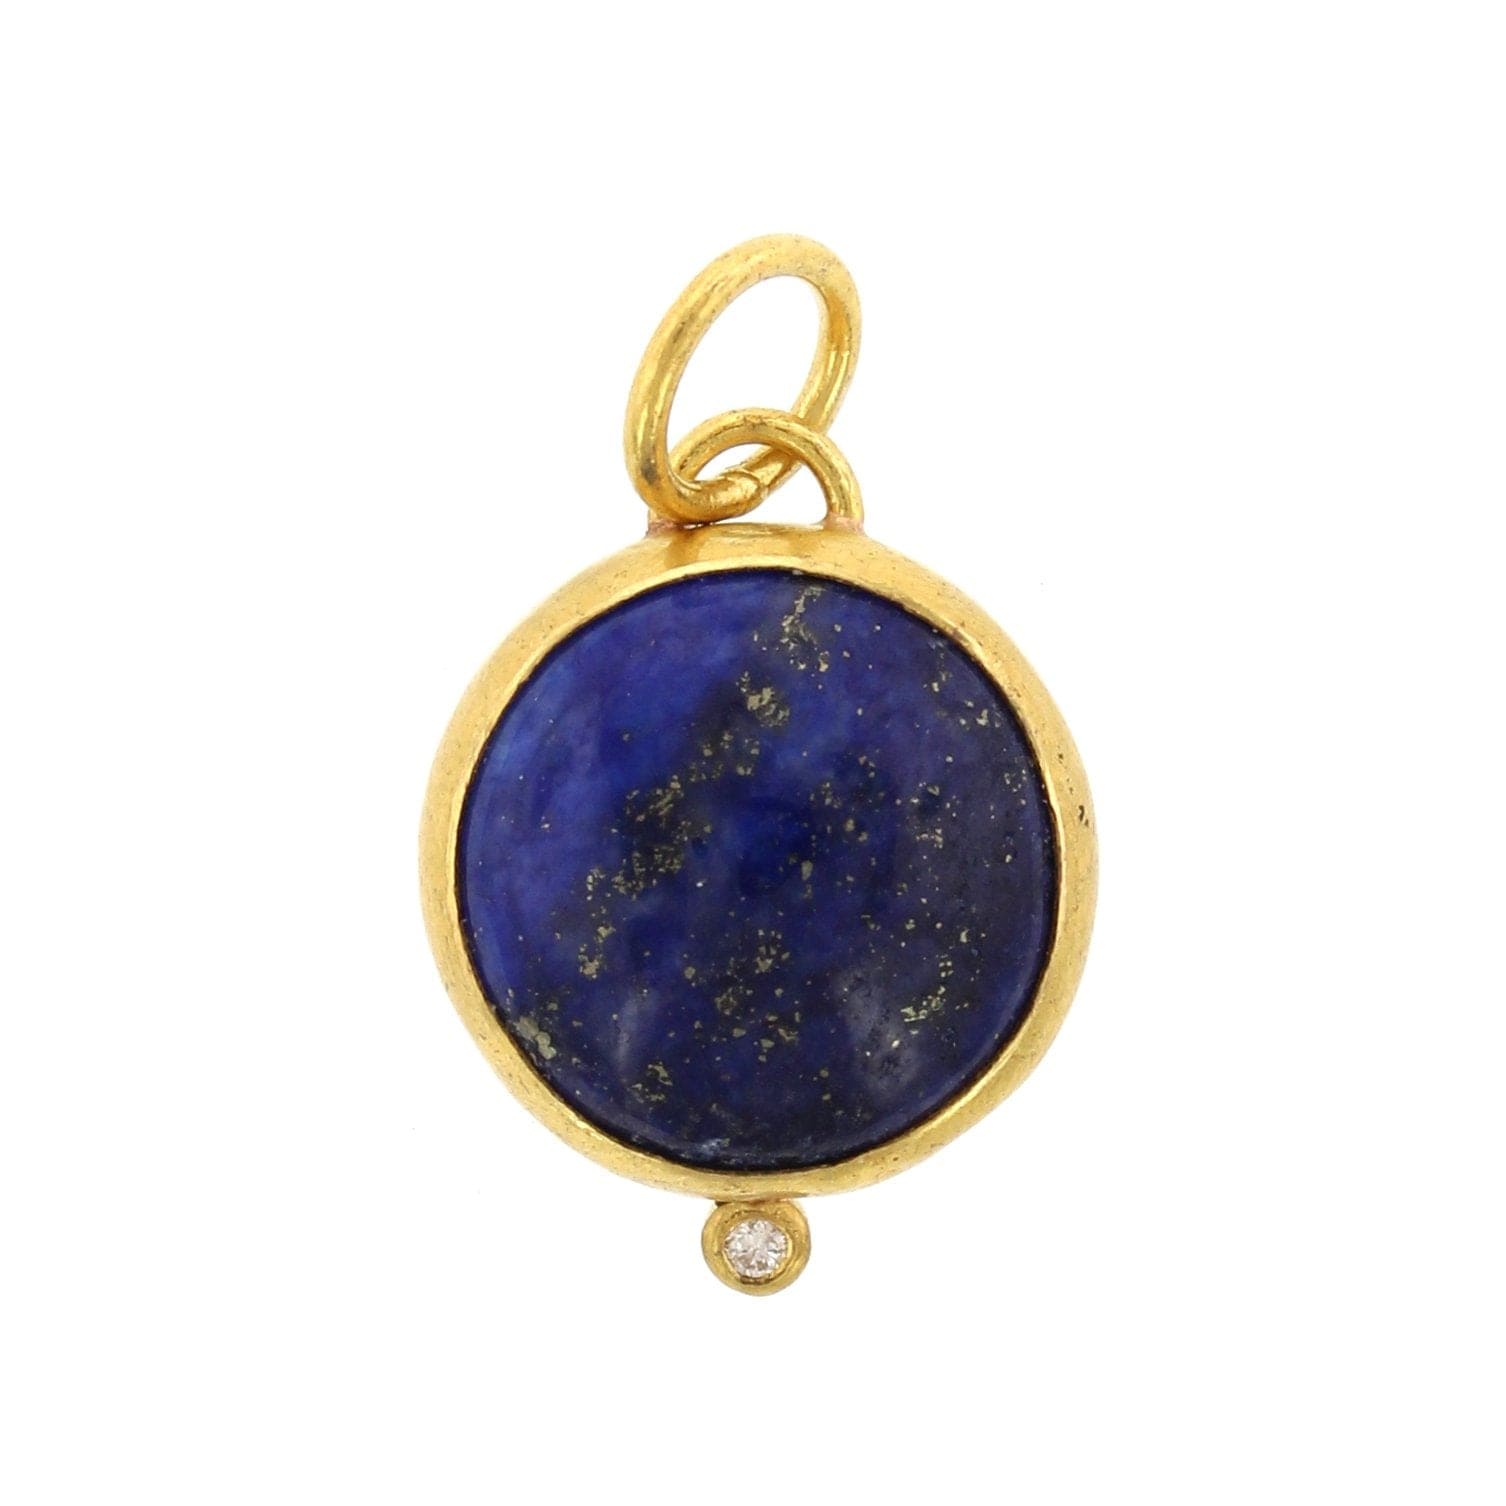 24K Yellow Gold and Sterling Silver Lapis Pendant